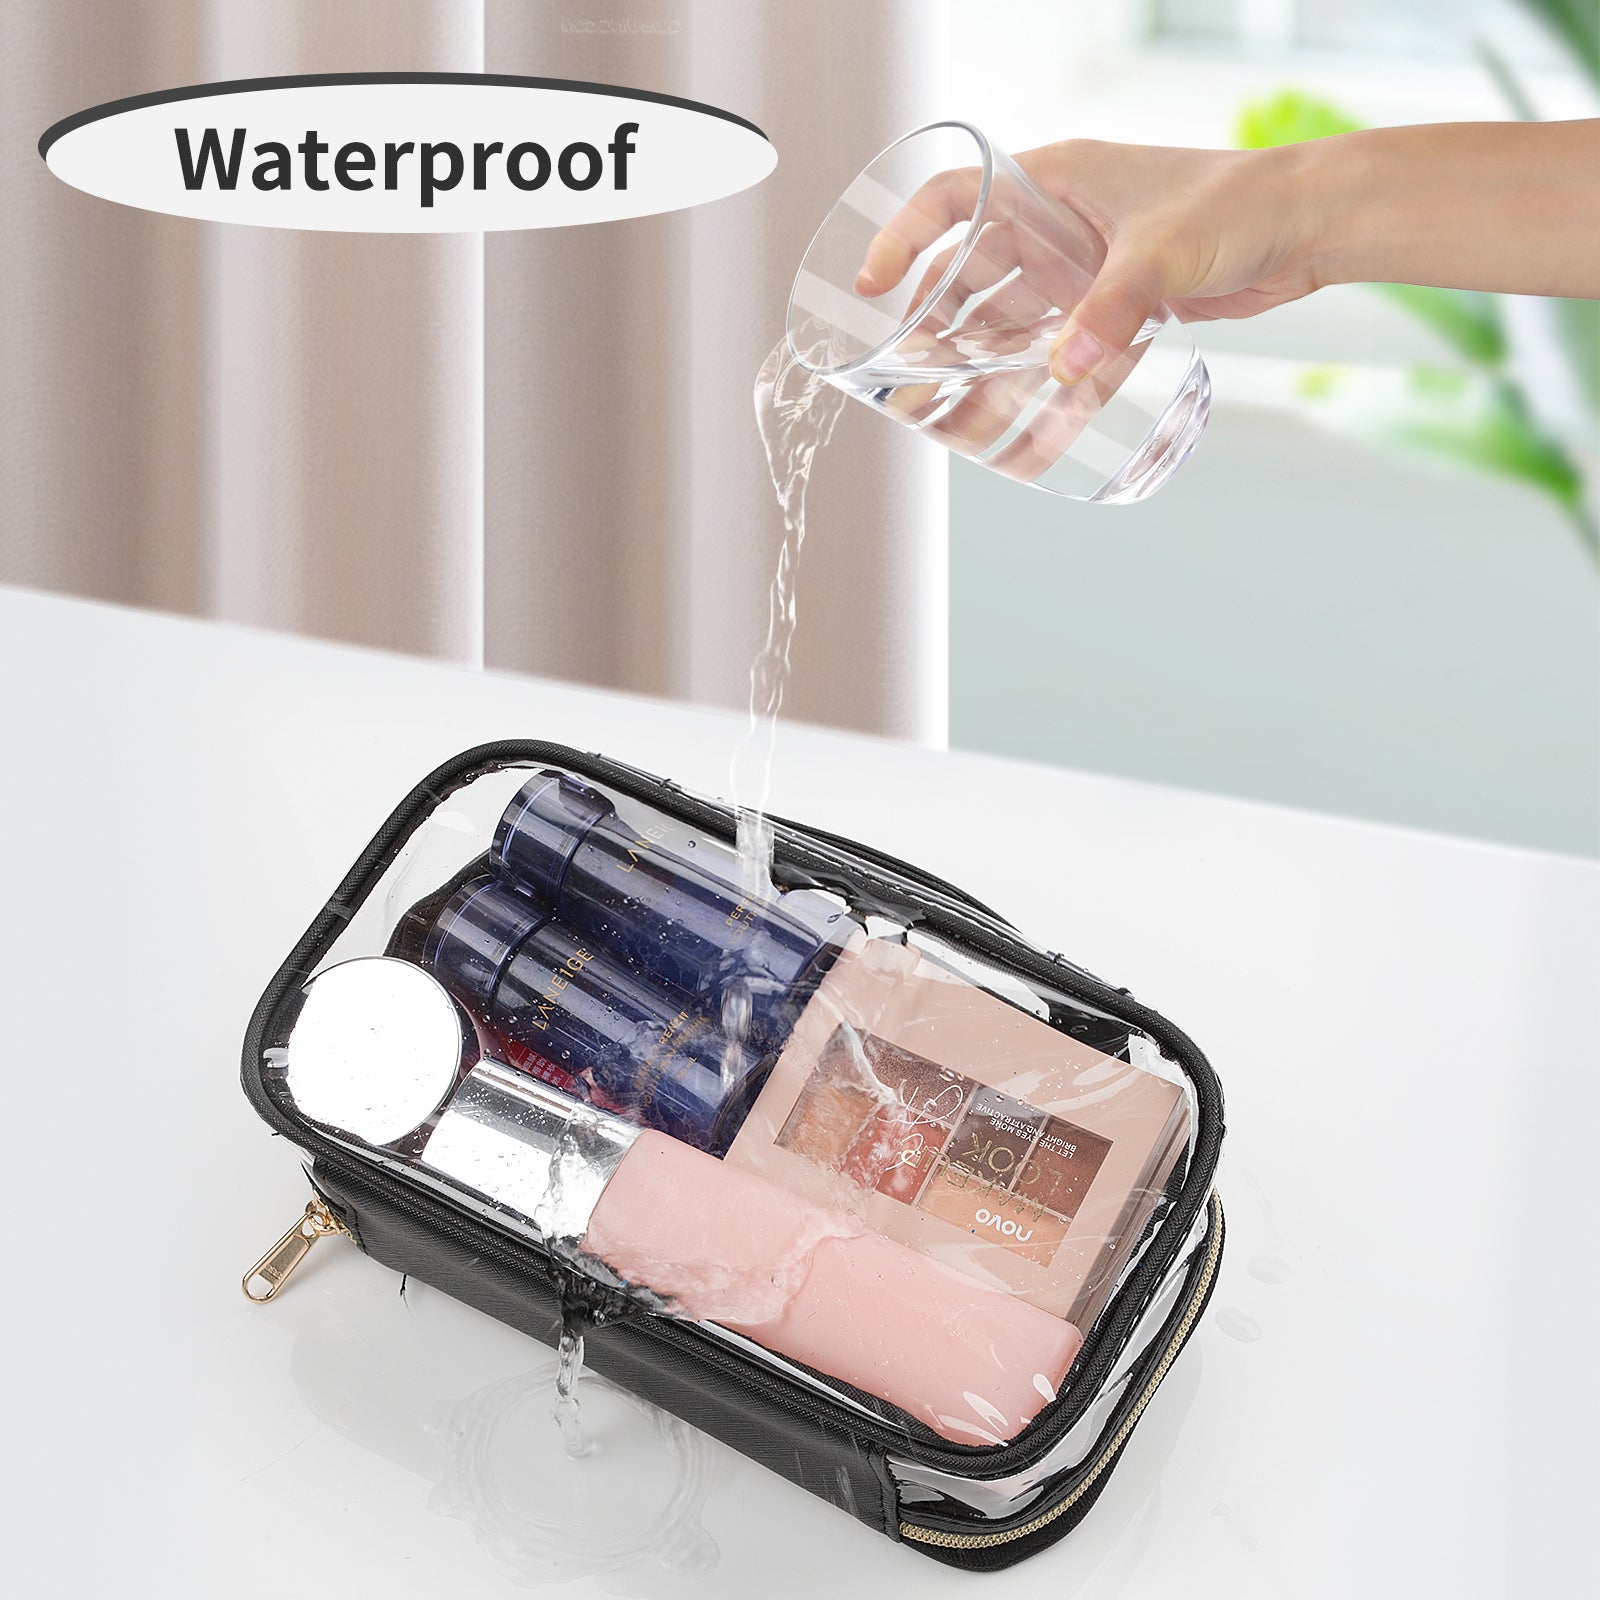 Relavel Clear Travel Makeup Bags